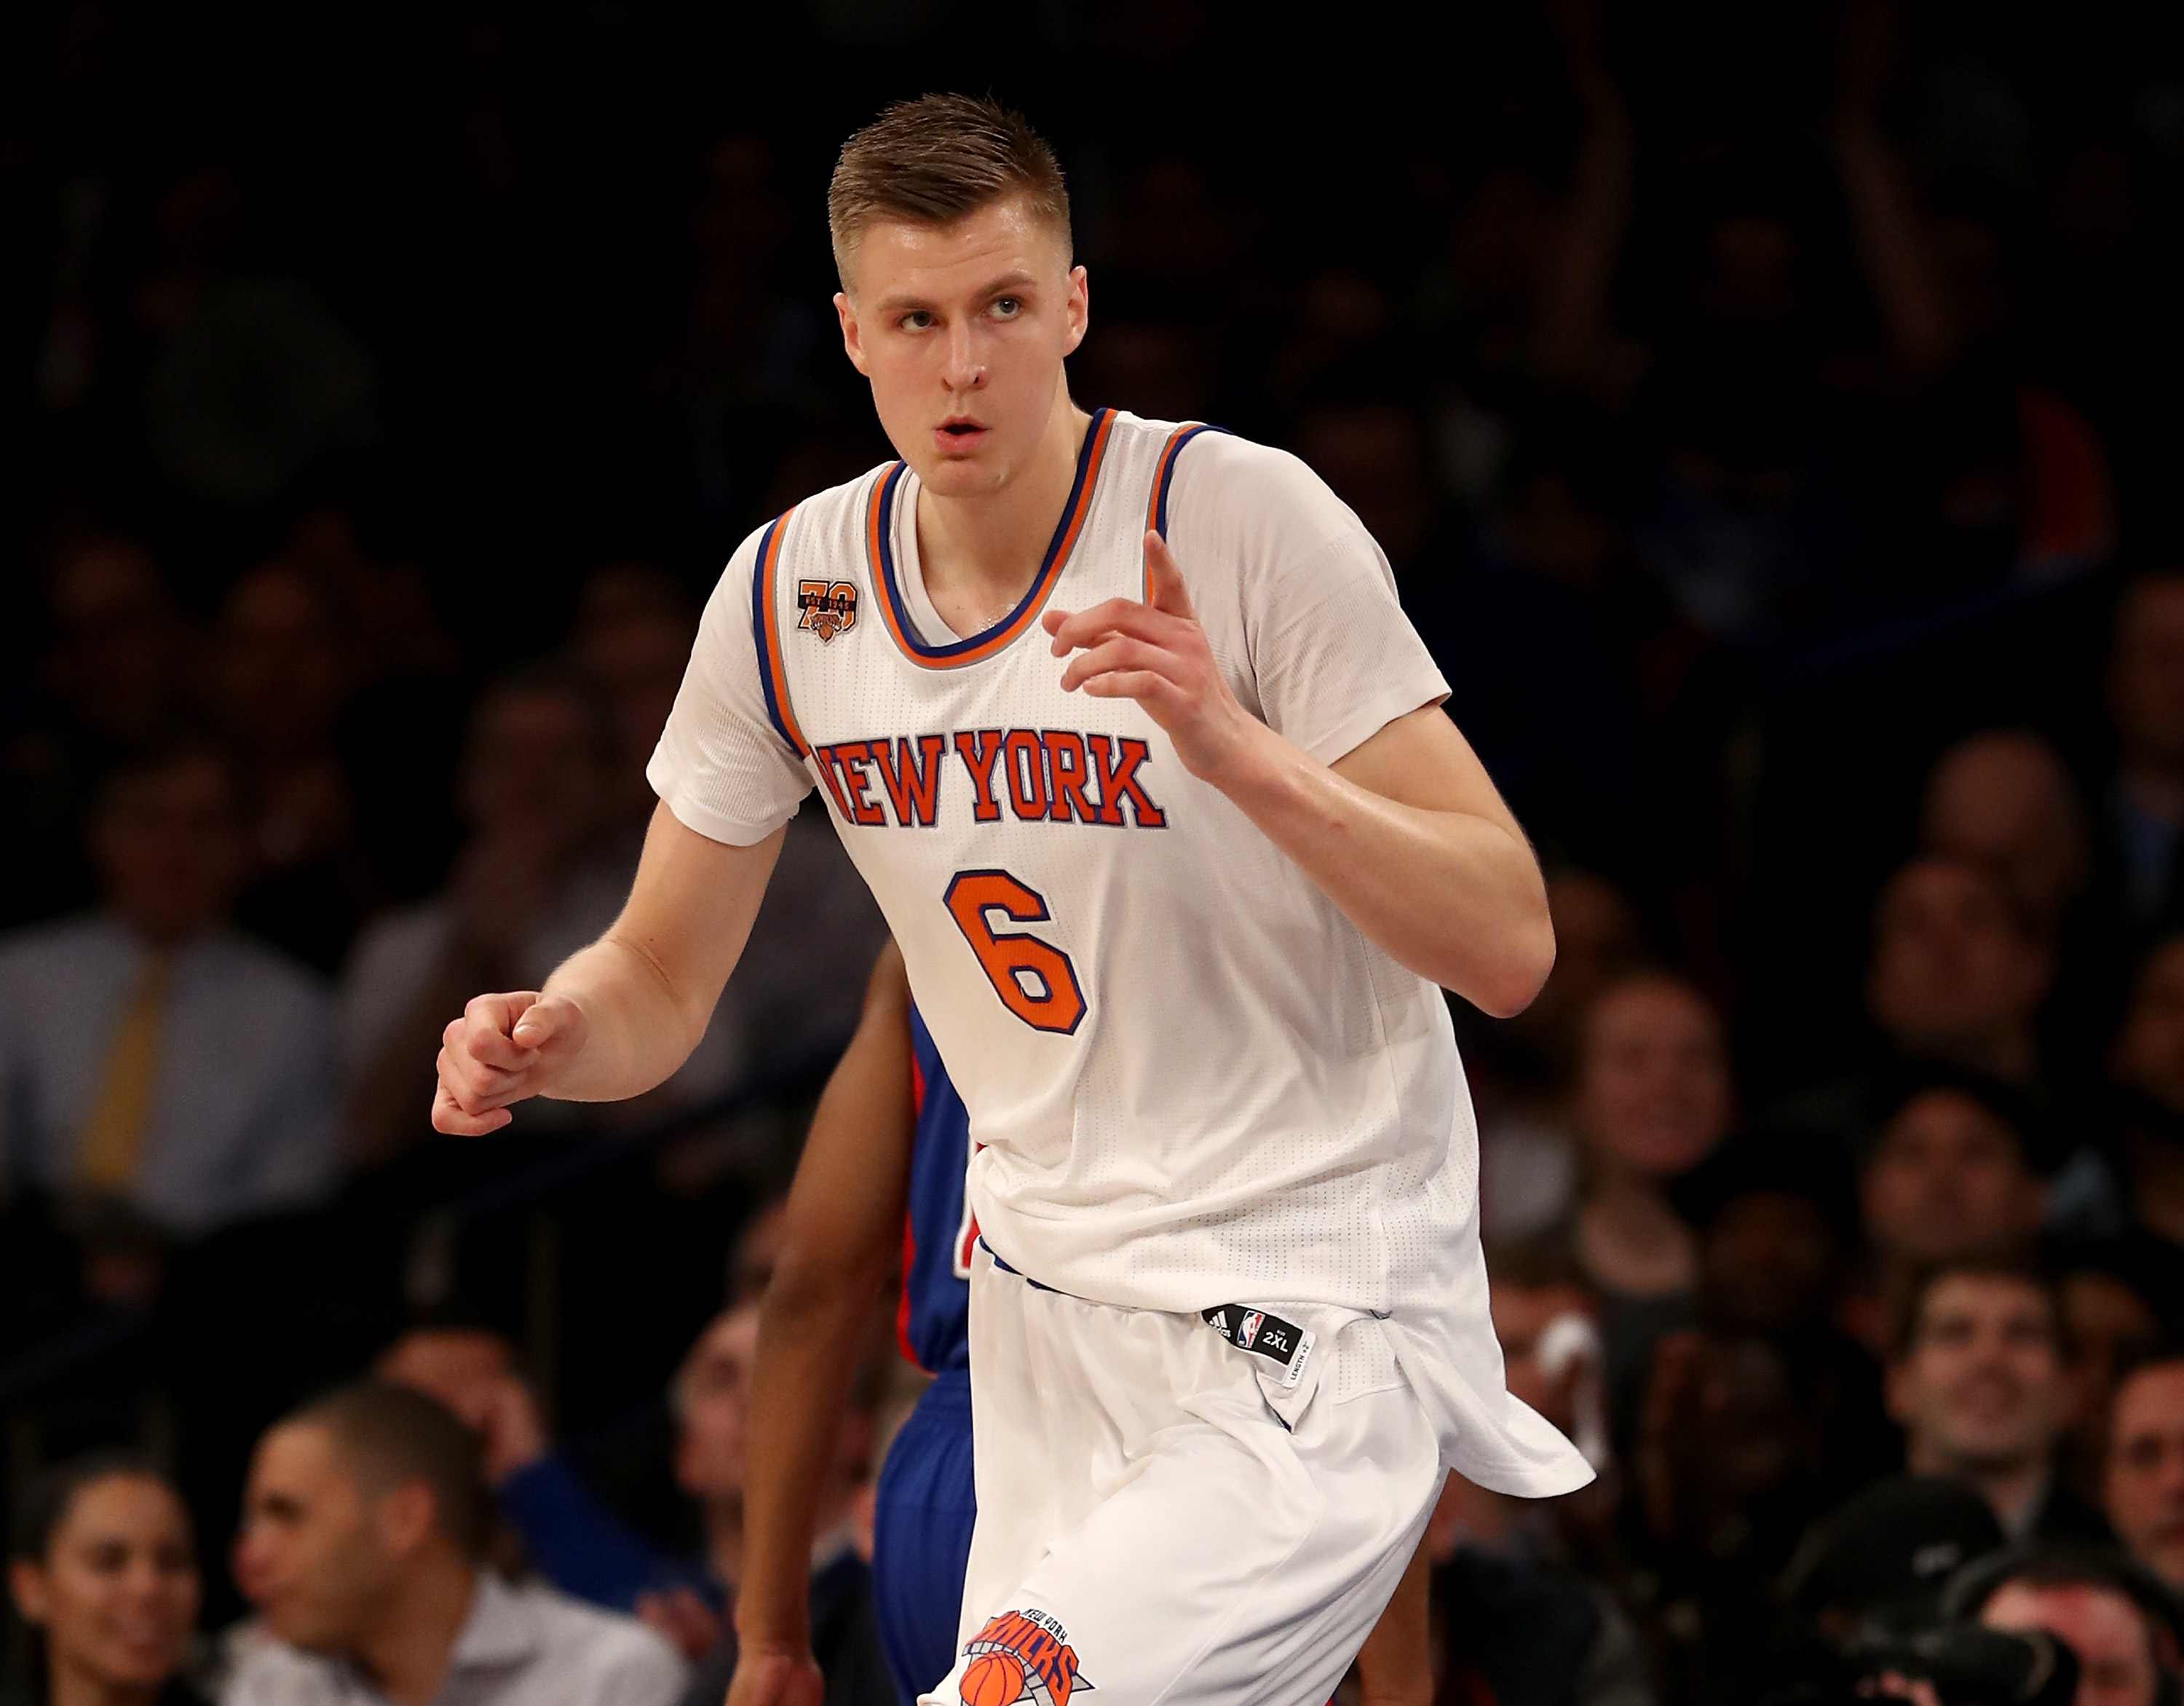 Kristaps Porzingis #6 of the New York Knicks celebrates his basket in the first quarter against the Detroit Pistons at Madison Square Garden on March 27, 2017 in New York City. NOTE TO USER: User expressly acknowledges and agrees that, by downloading and or using this Photograph, user is consenting to the terms and conditions of the Getty Images License Agreement   Elsa/Getty Images/AFP